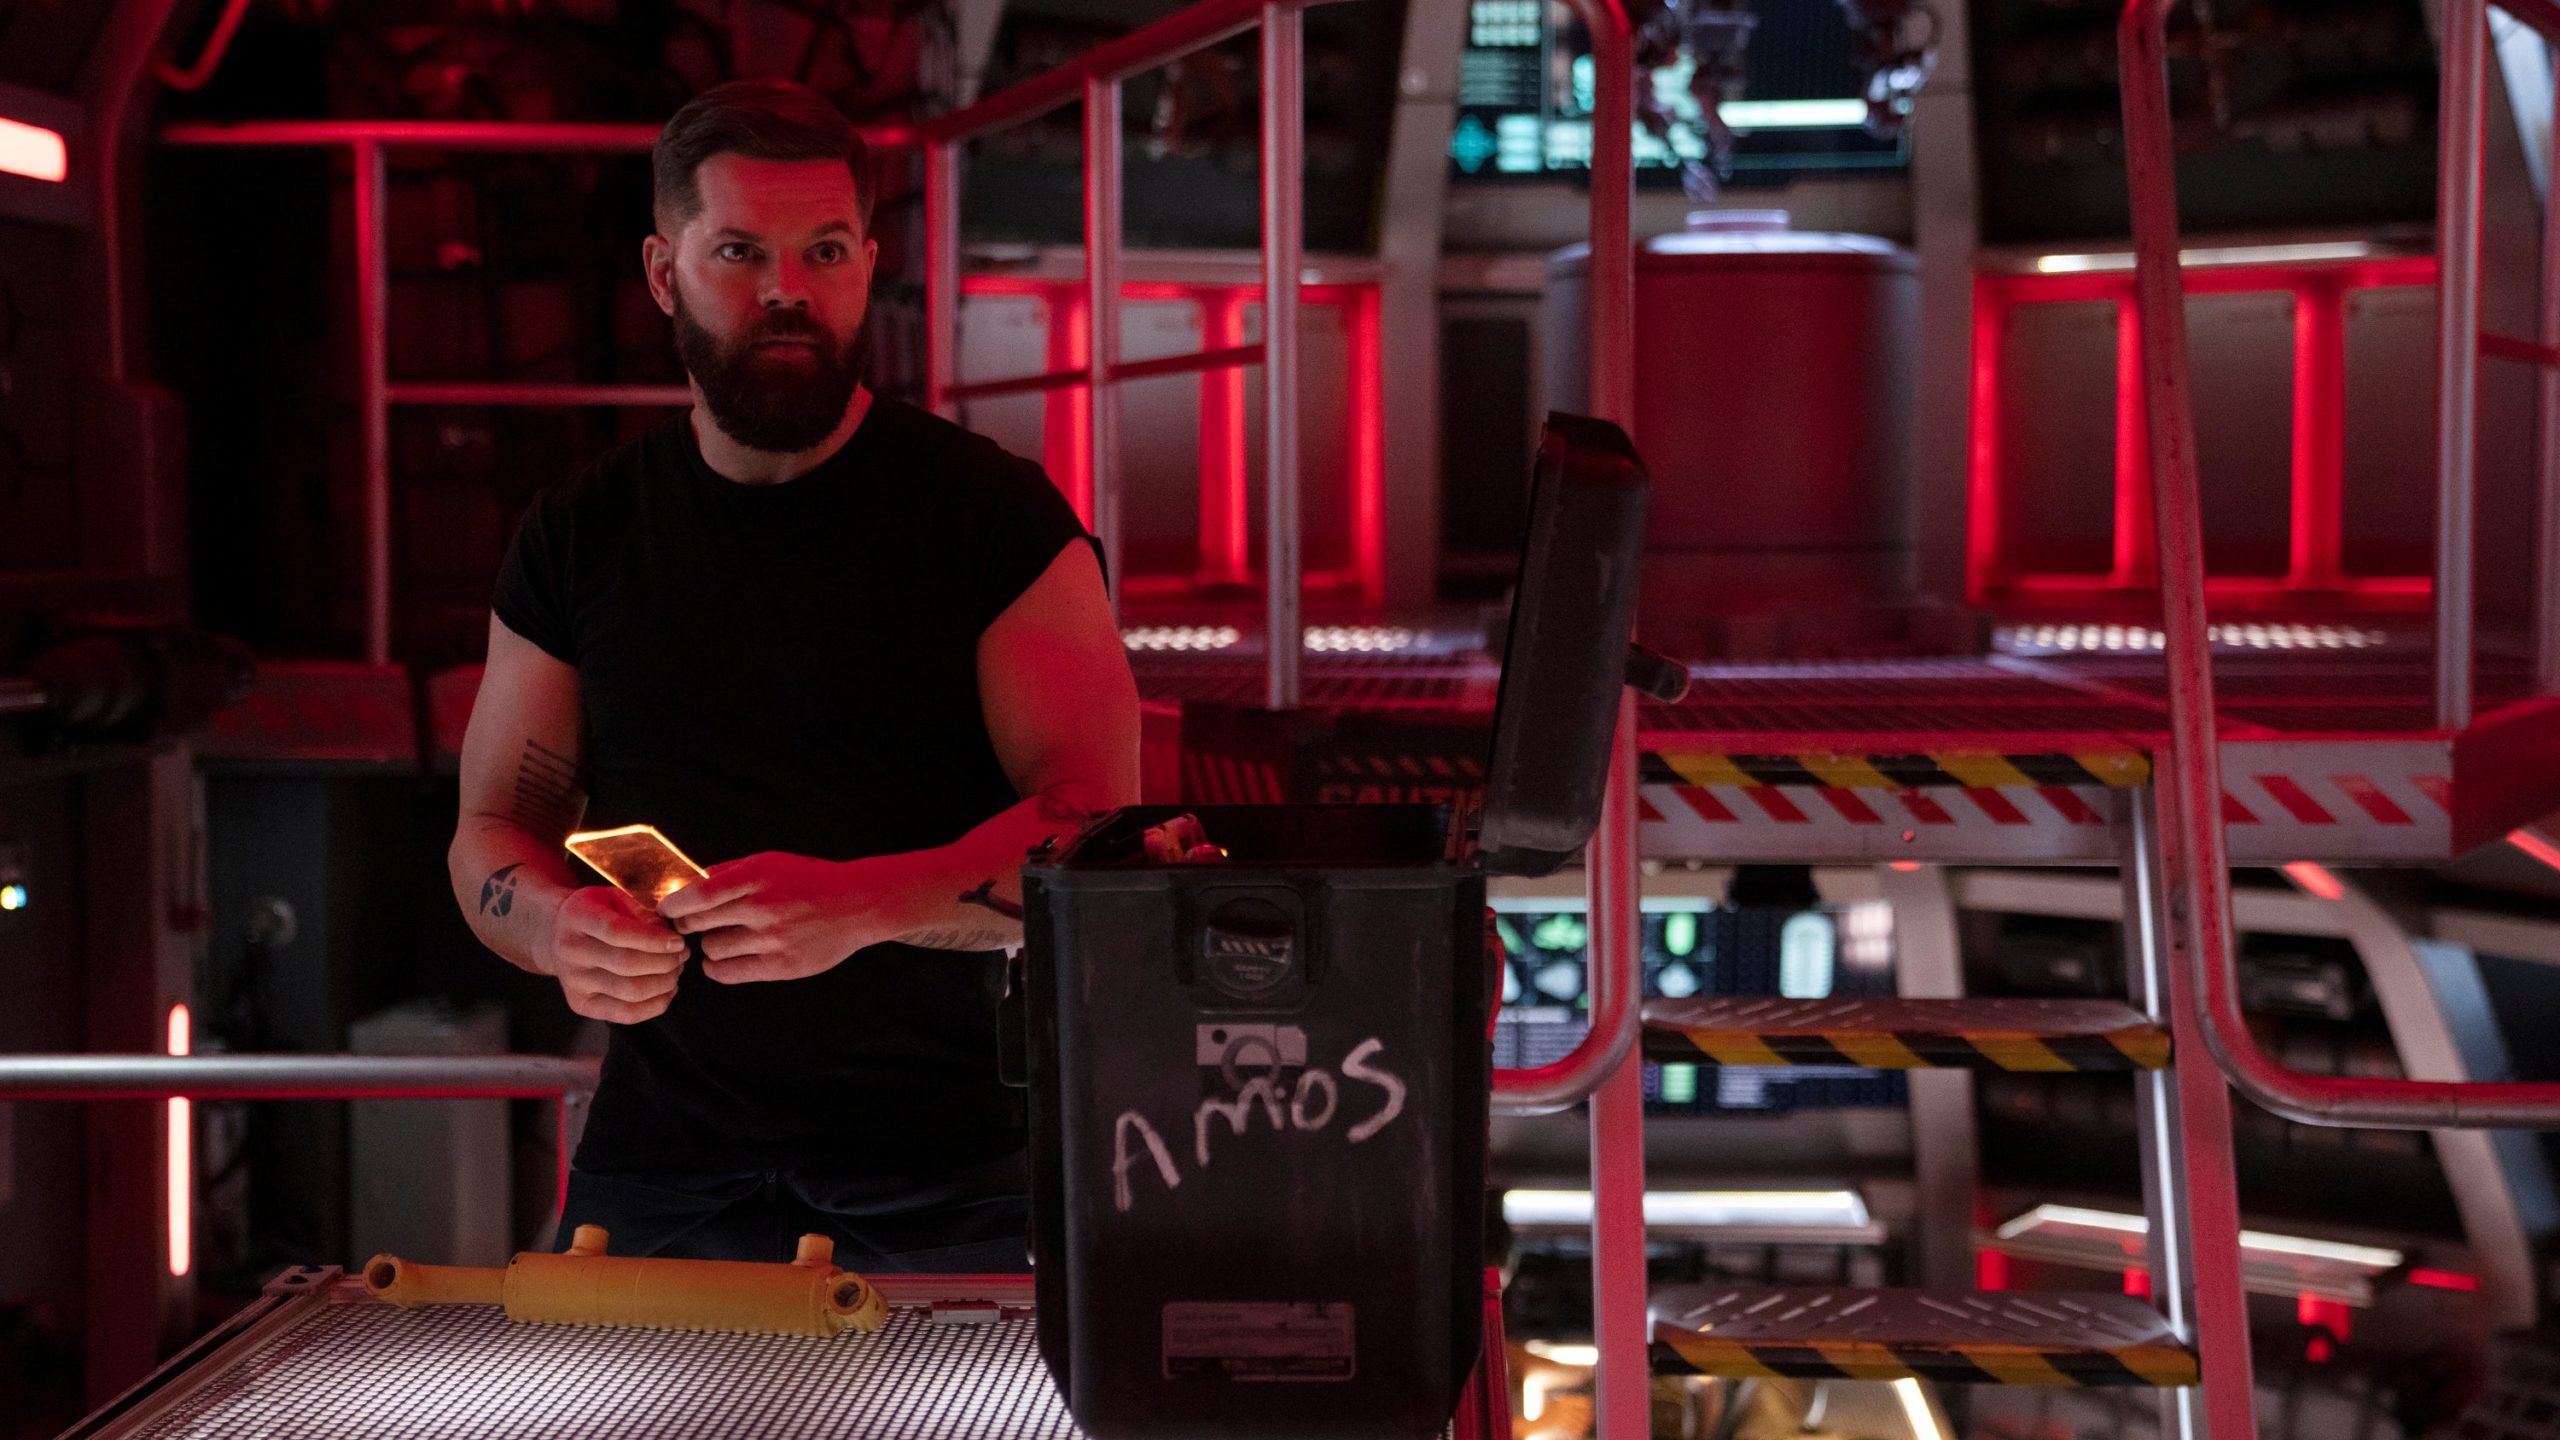  Woe be it unto anyone who messes with Amos' clearly labelled box of stuff. (Image: Amazon Studios)